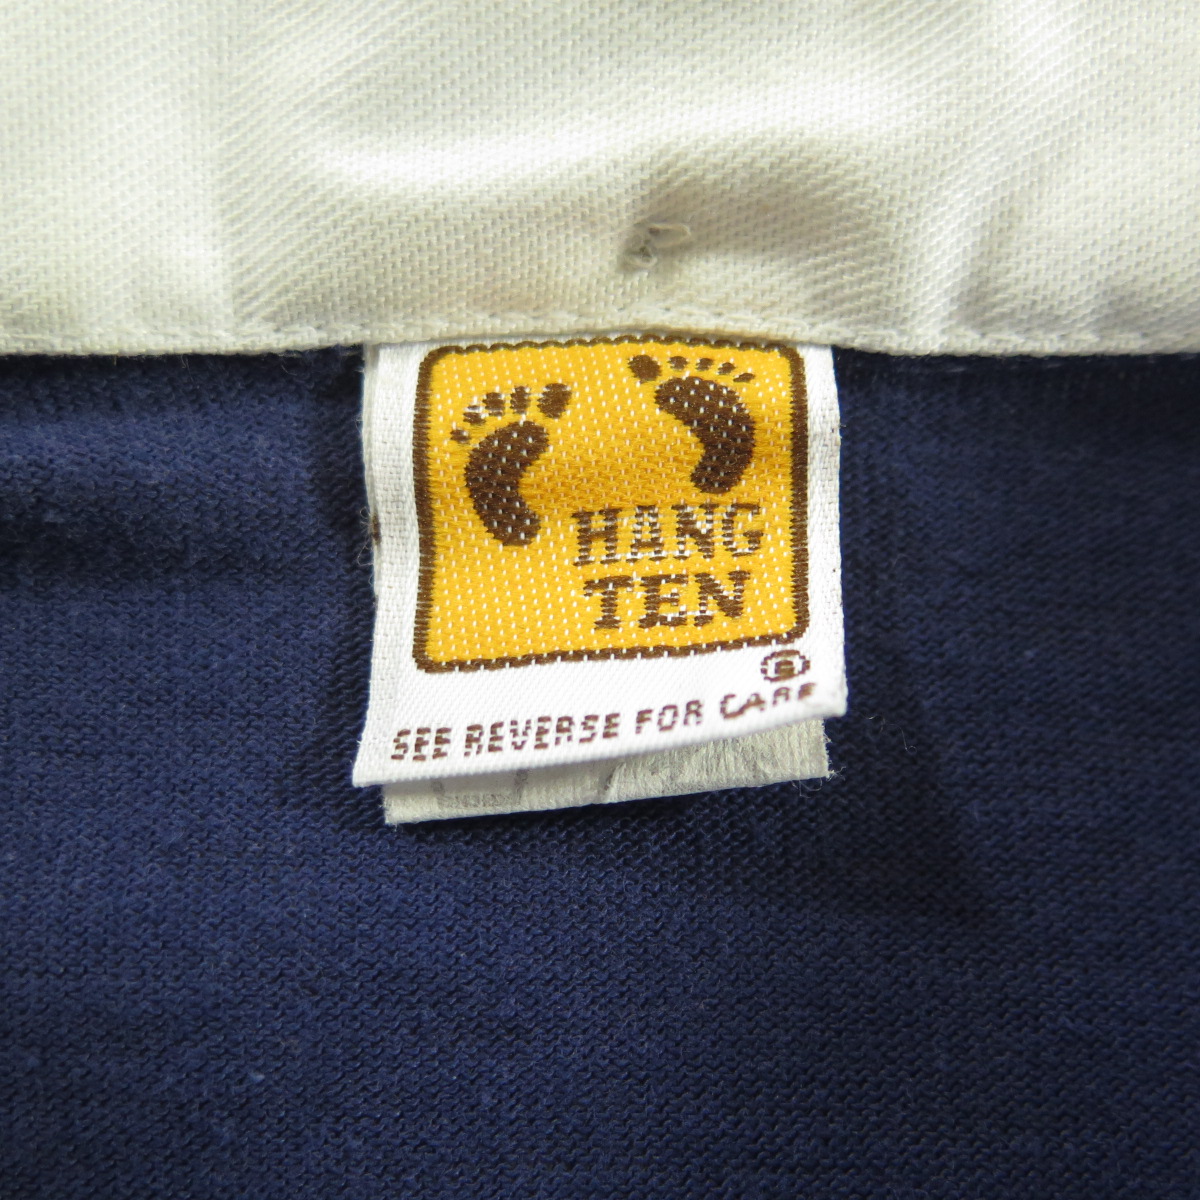 Hang Ten shirts: the in crowd name brand clothing line of the 1970s :  r/nostalgia